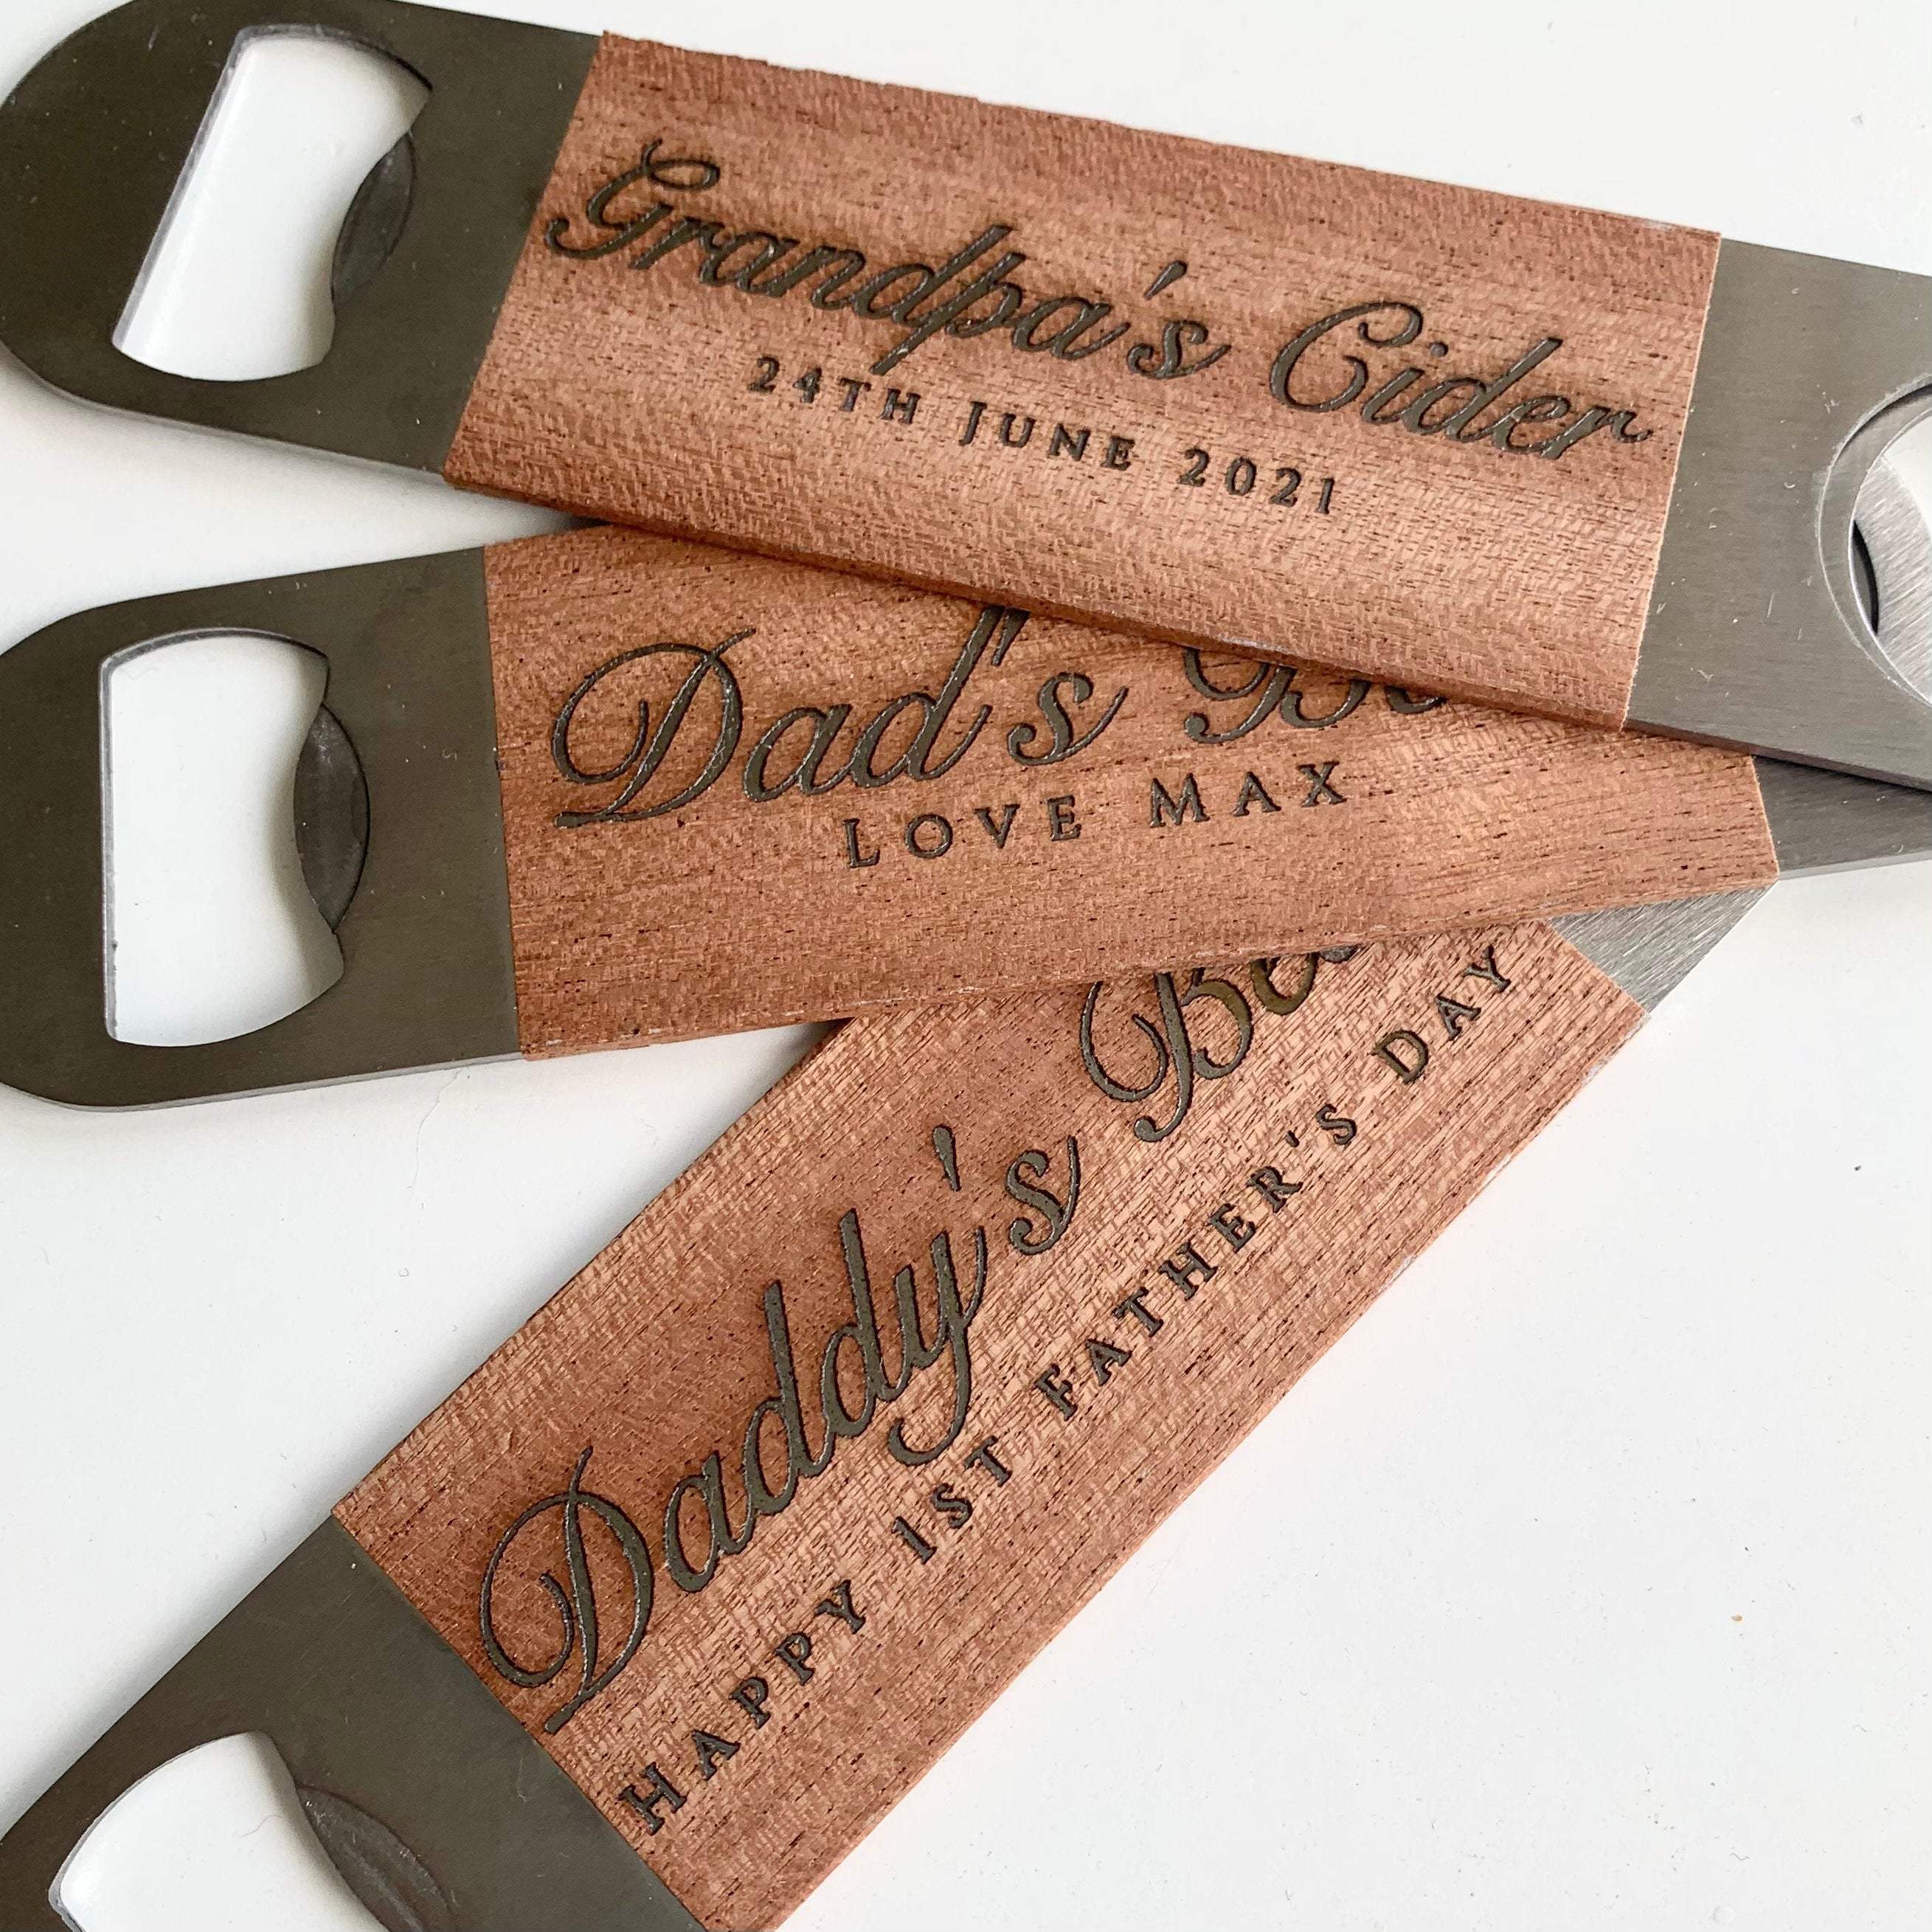 Personalised engraved stainless steel bottle opener, Gift for dad, Father's Day gift for daddy